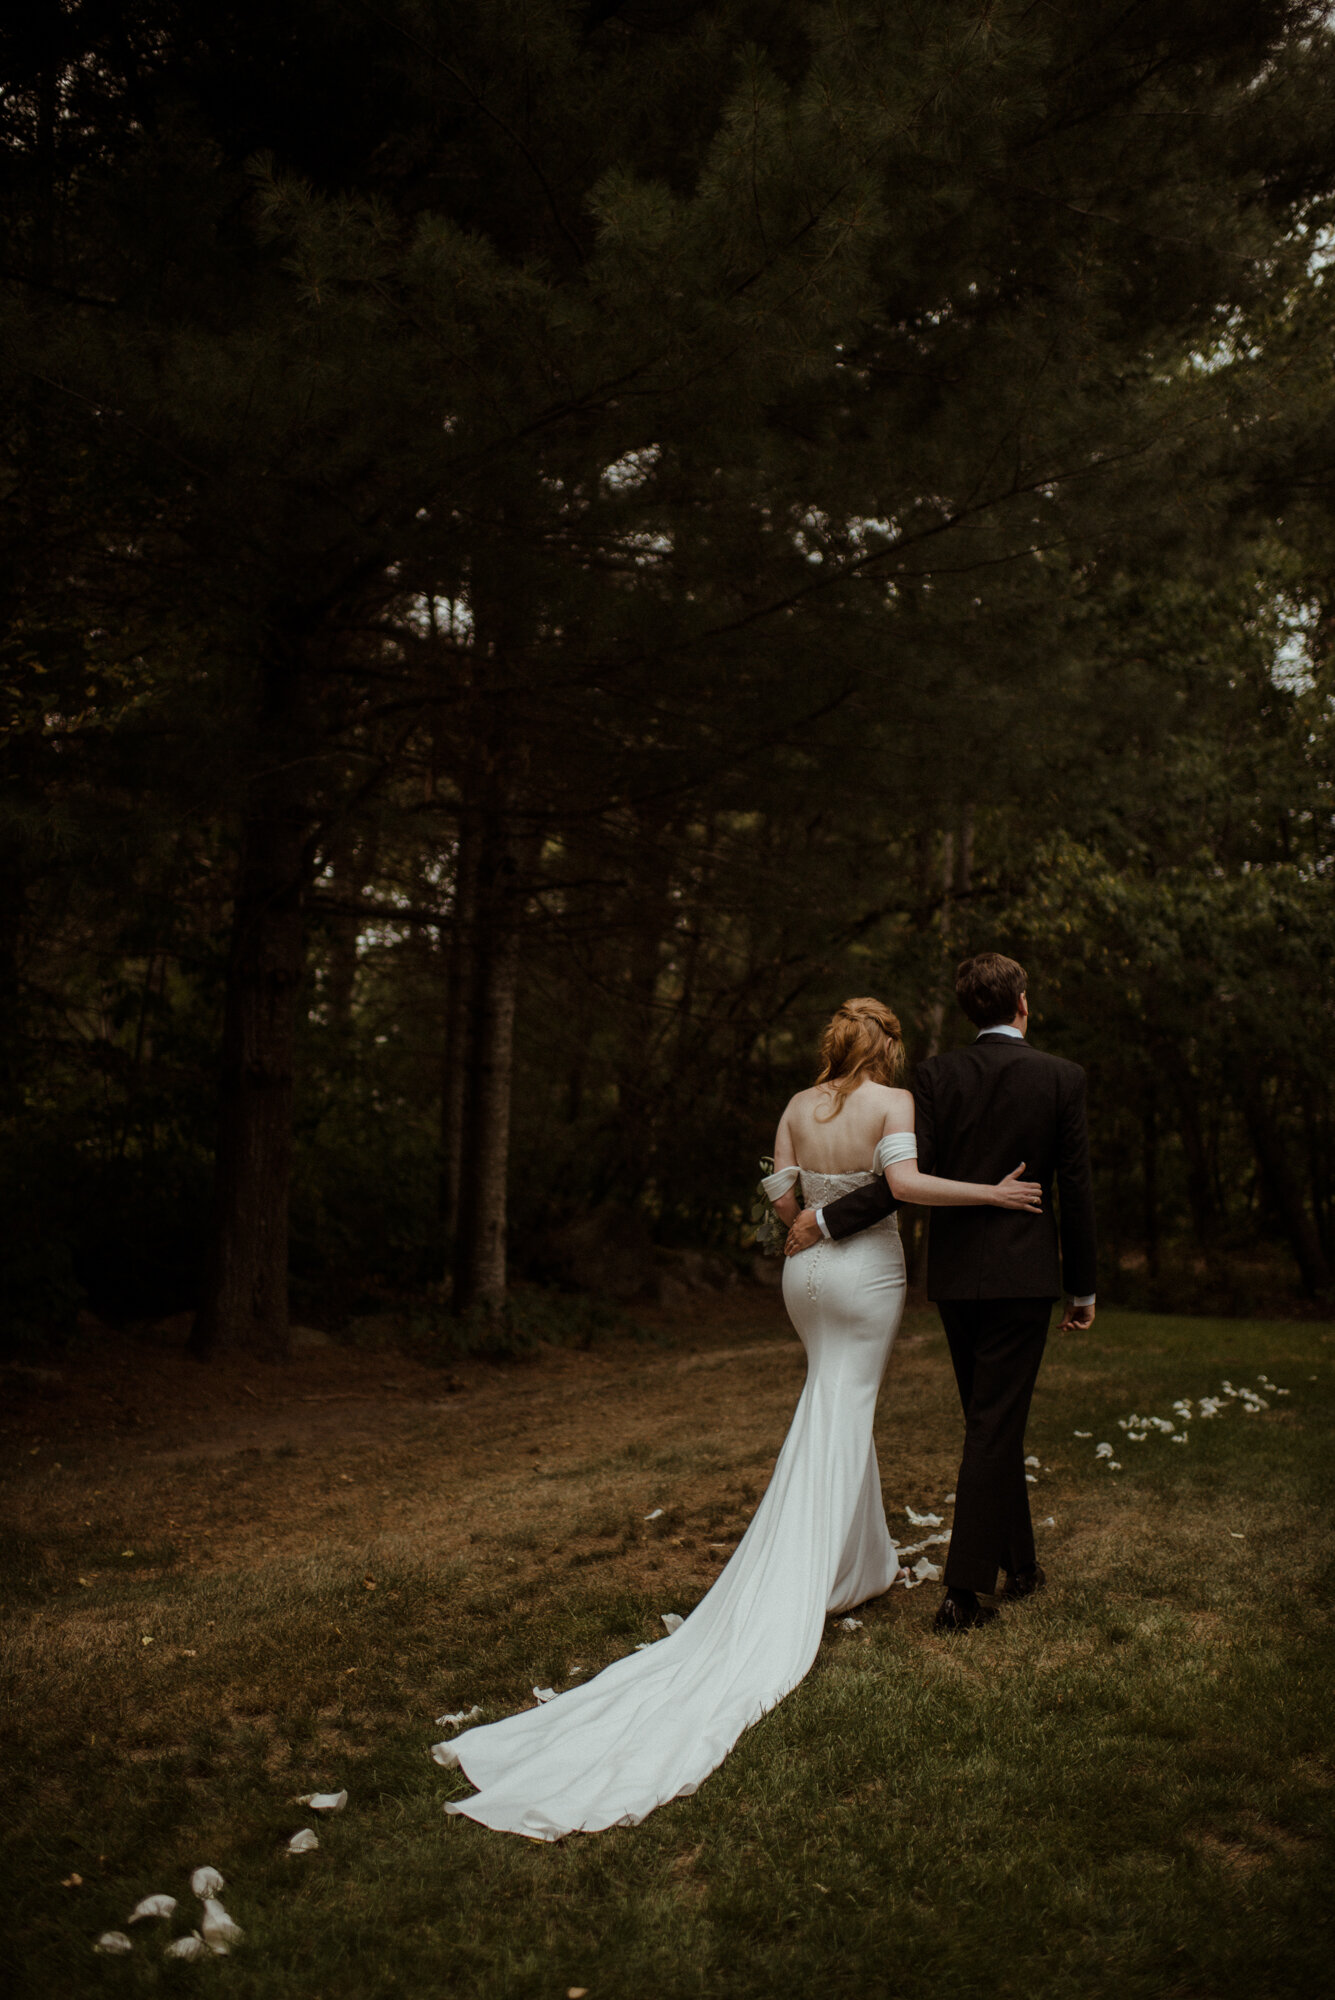 Autumn Elopement in New Hampshire - Backyard Wedding during COVID and Sunrise Hike in Wedding Dress - White Sails Creative_65.jpg